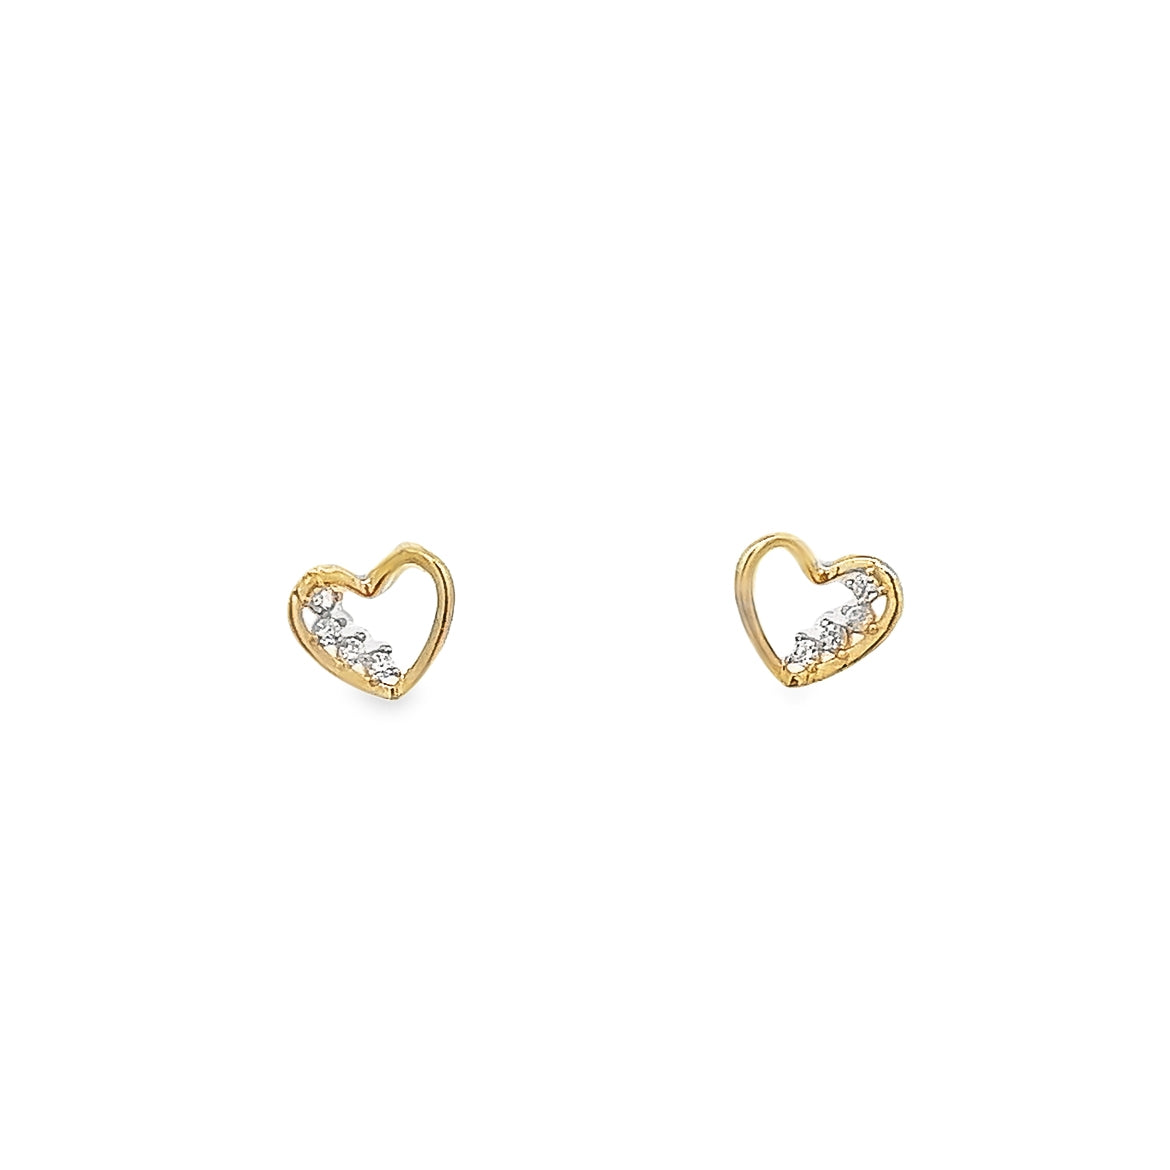 14K GOLD HEART WITH CRYSTALS EARRINGS